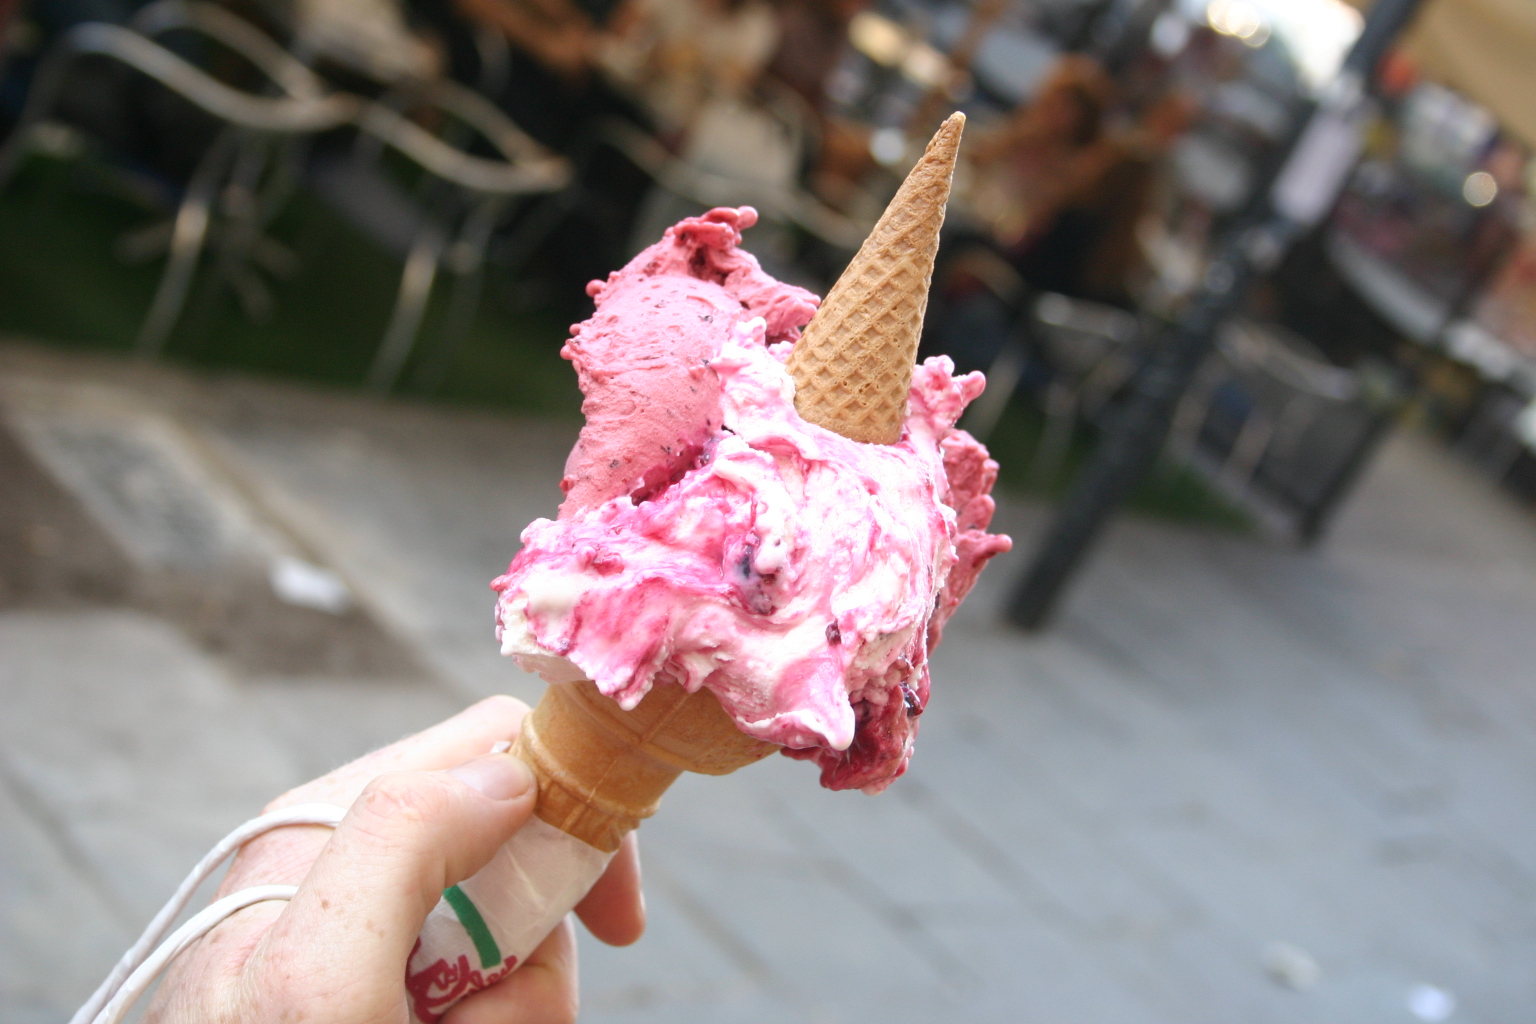 Ice Cream, email marketing, and social media?